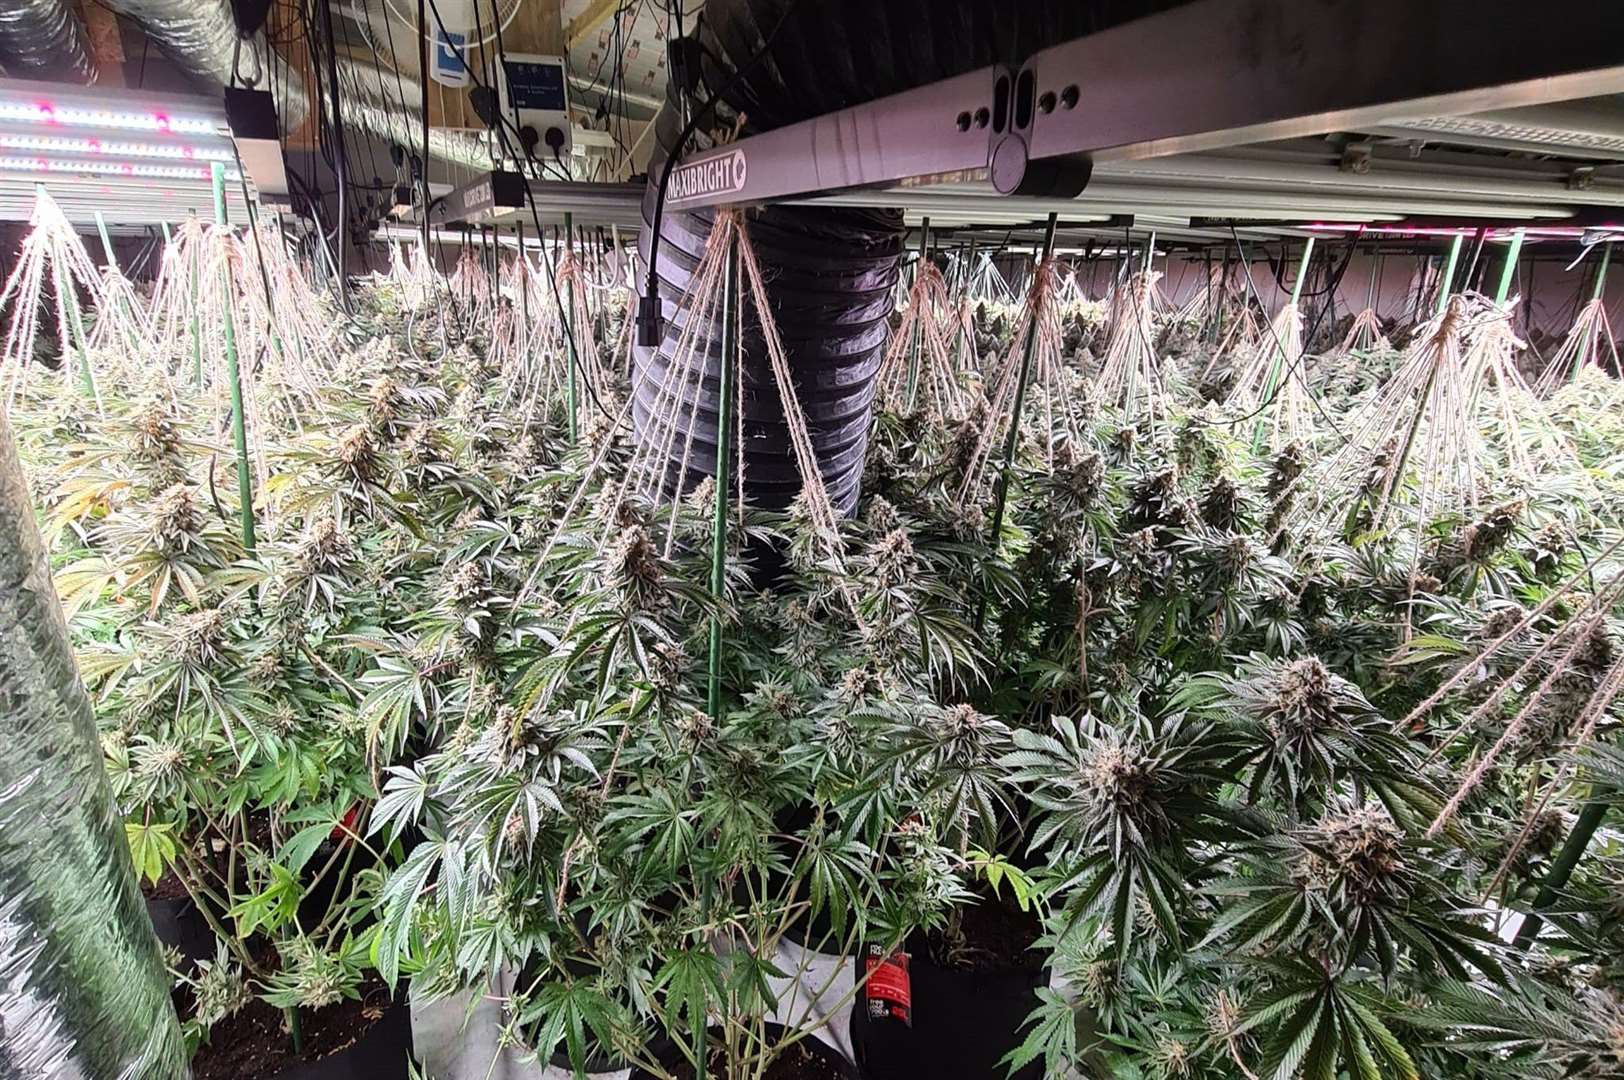 The cannabis cultivation in Headcorn. Picture: Kent Police